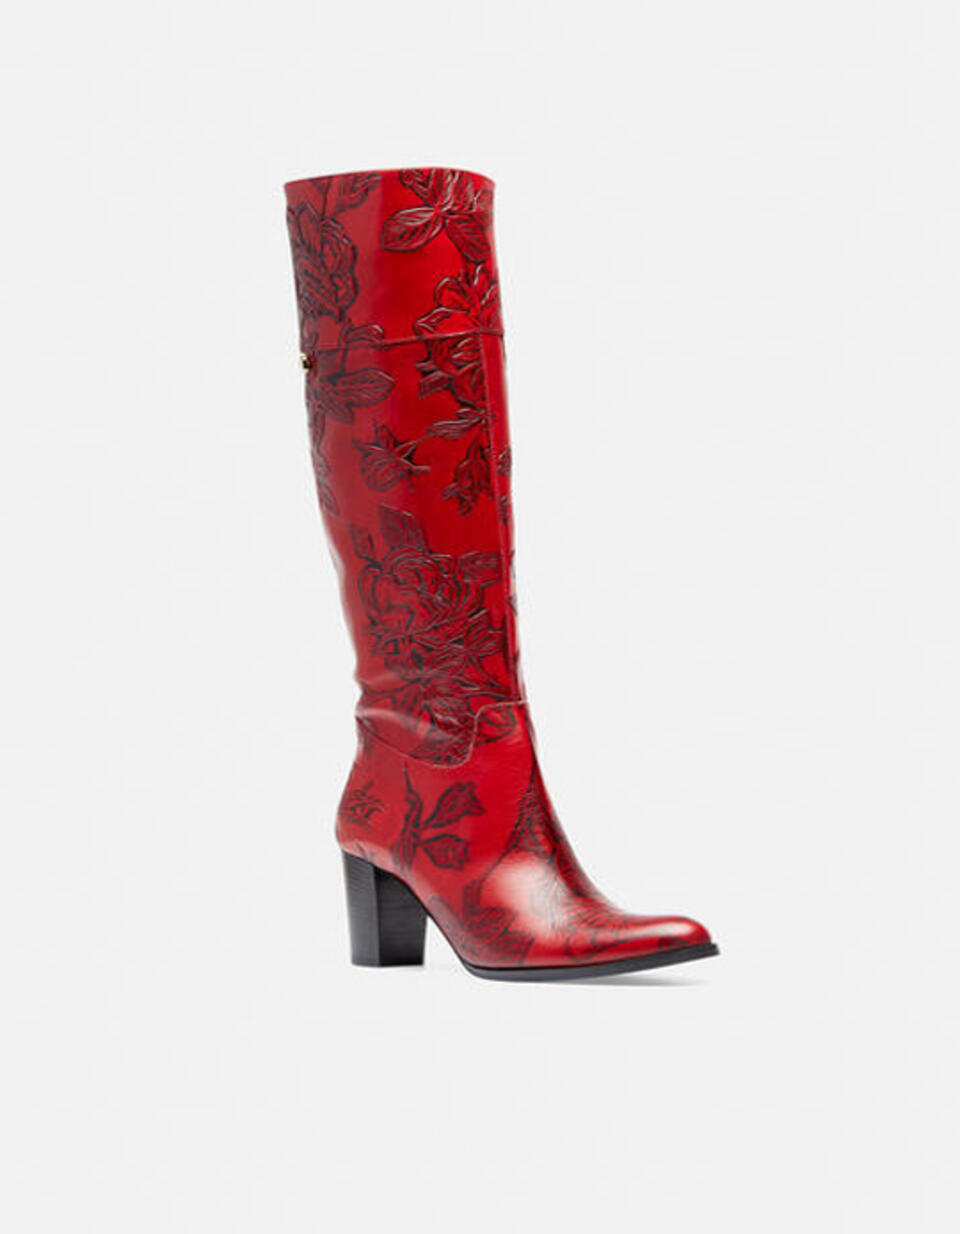 Mimì high boot Red  - Woman Shoes - Shoes - Cuoieria Fiorentina